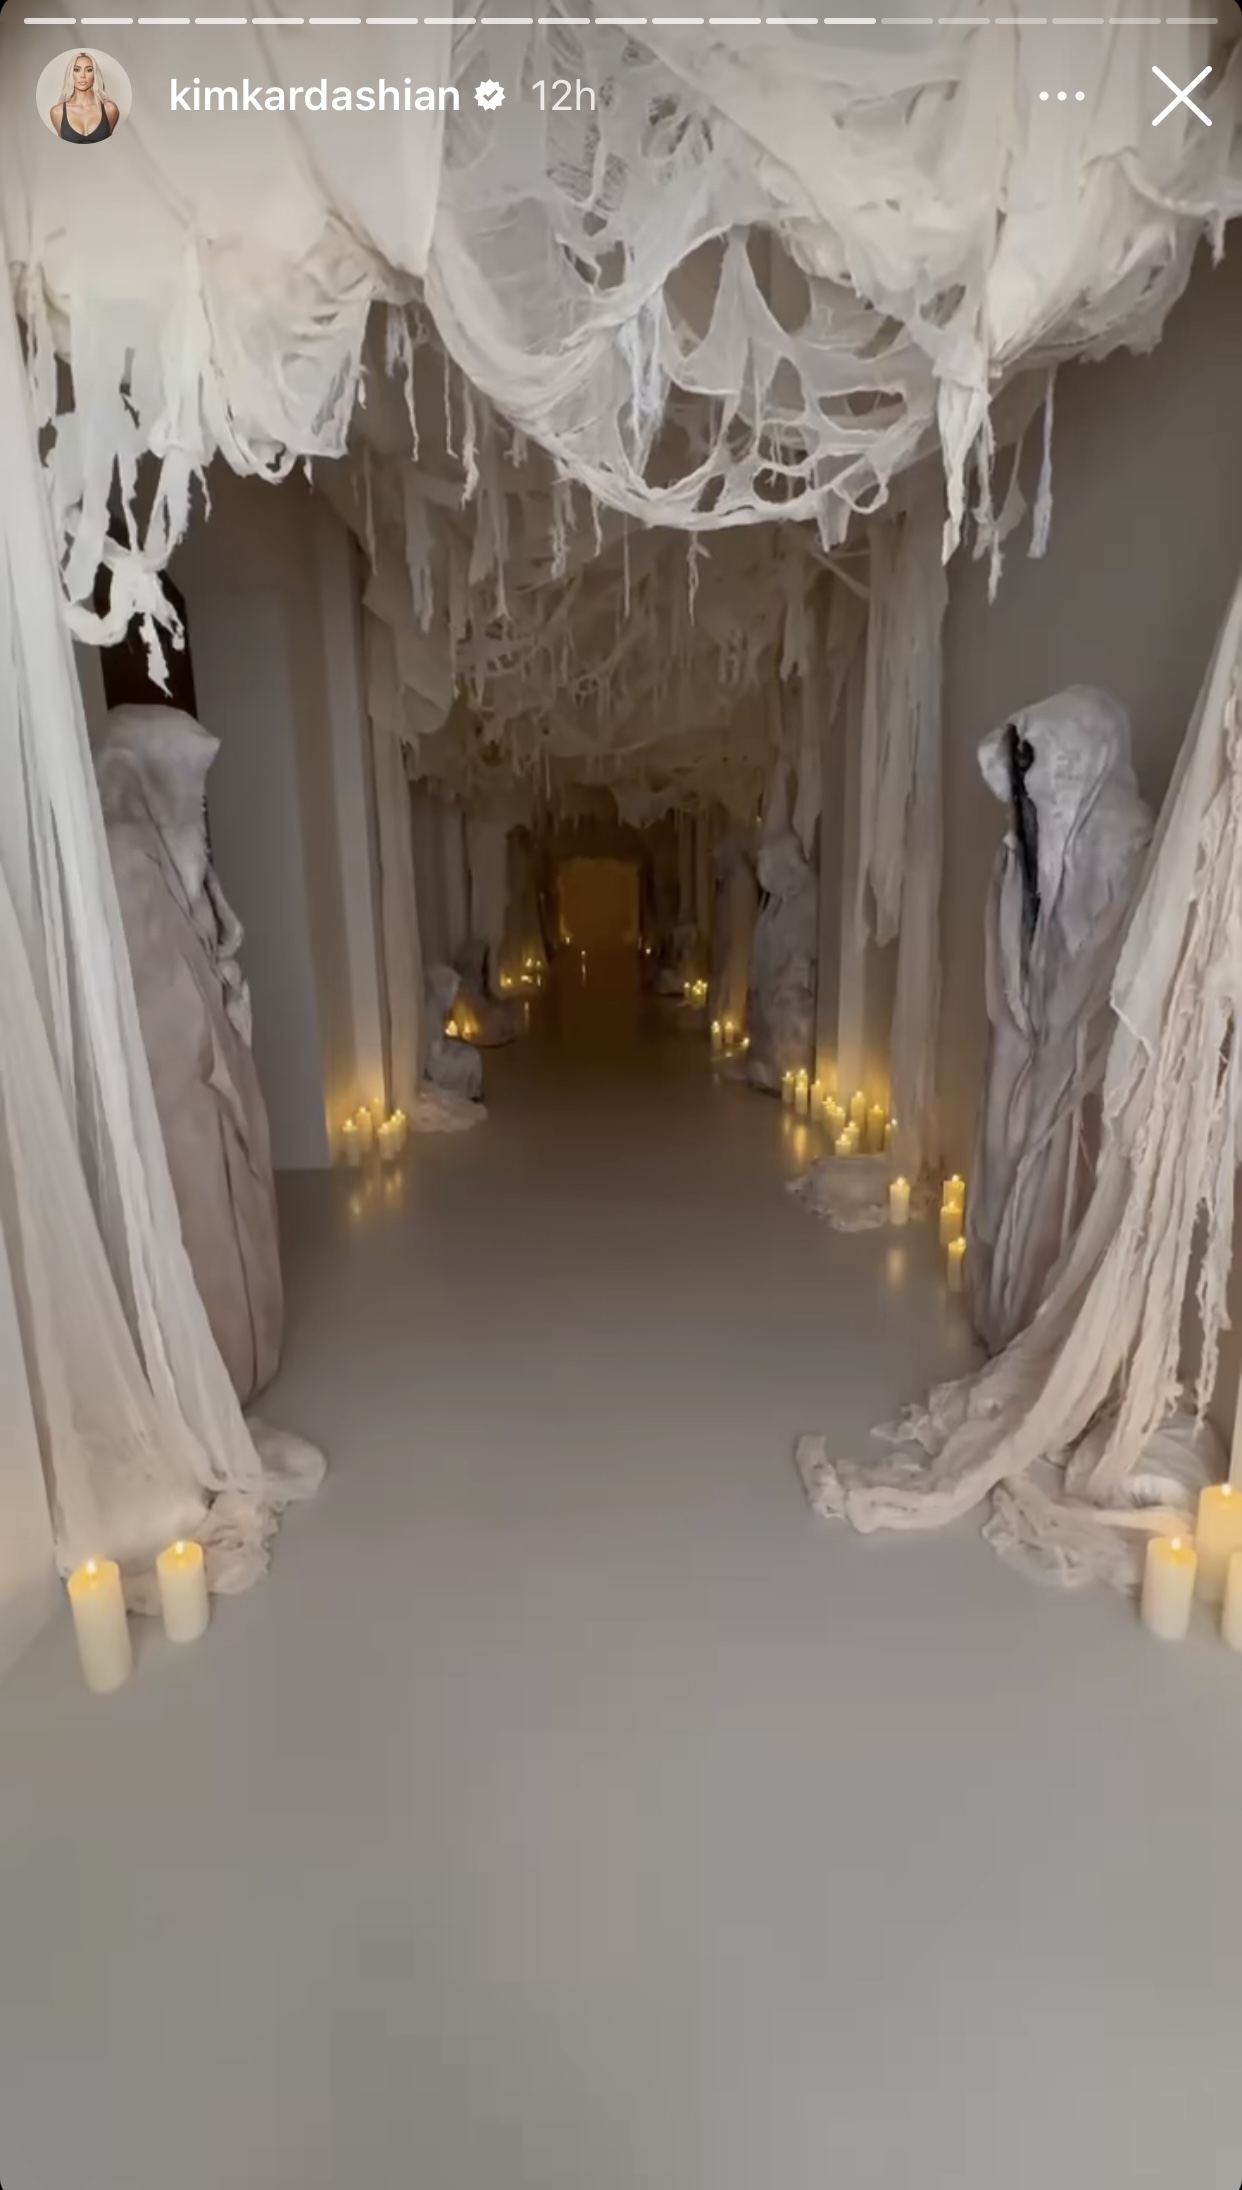 life-sized ghouls standing throughout the hallway